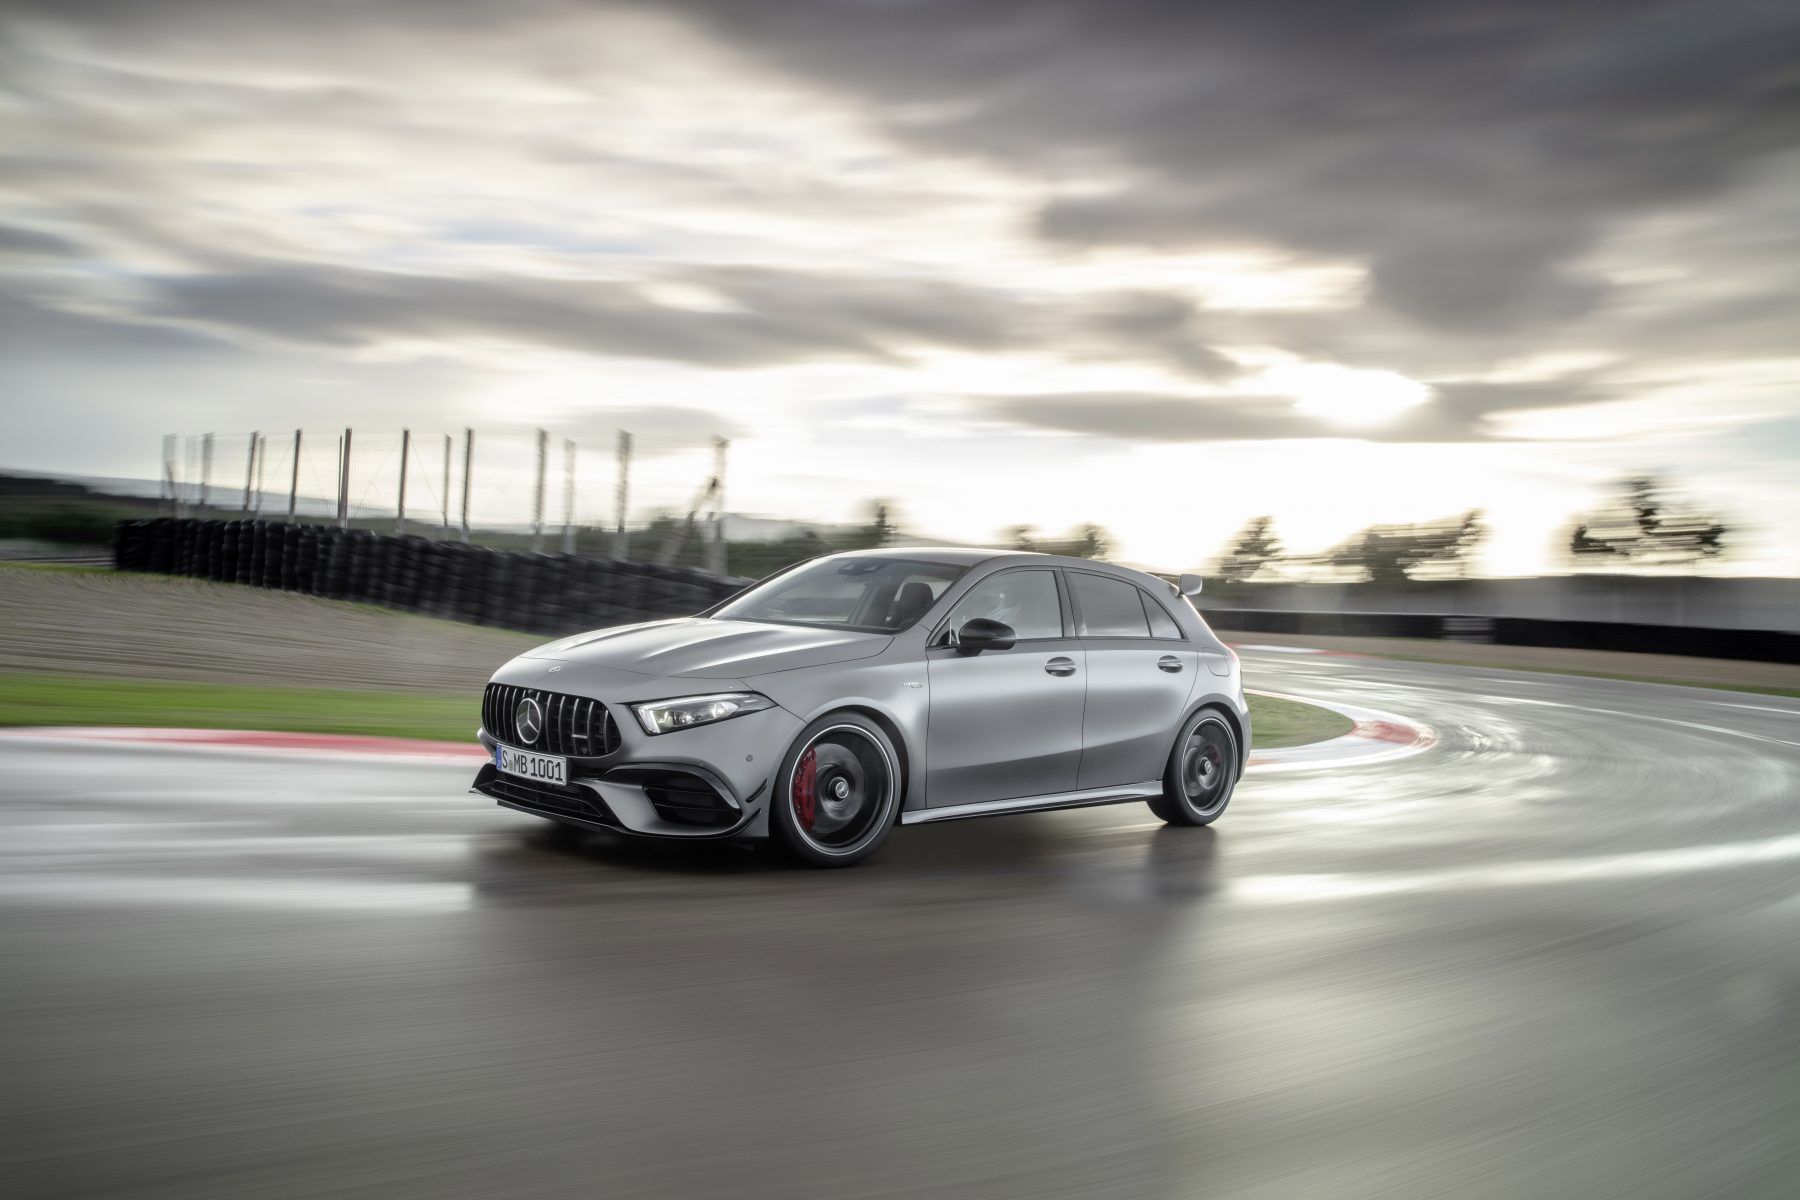 Side view of a Mercedes-Benz A45 AMG driving on a track